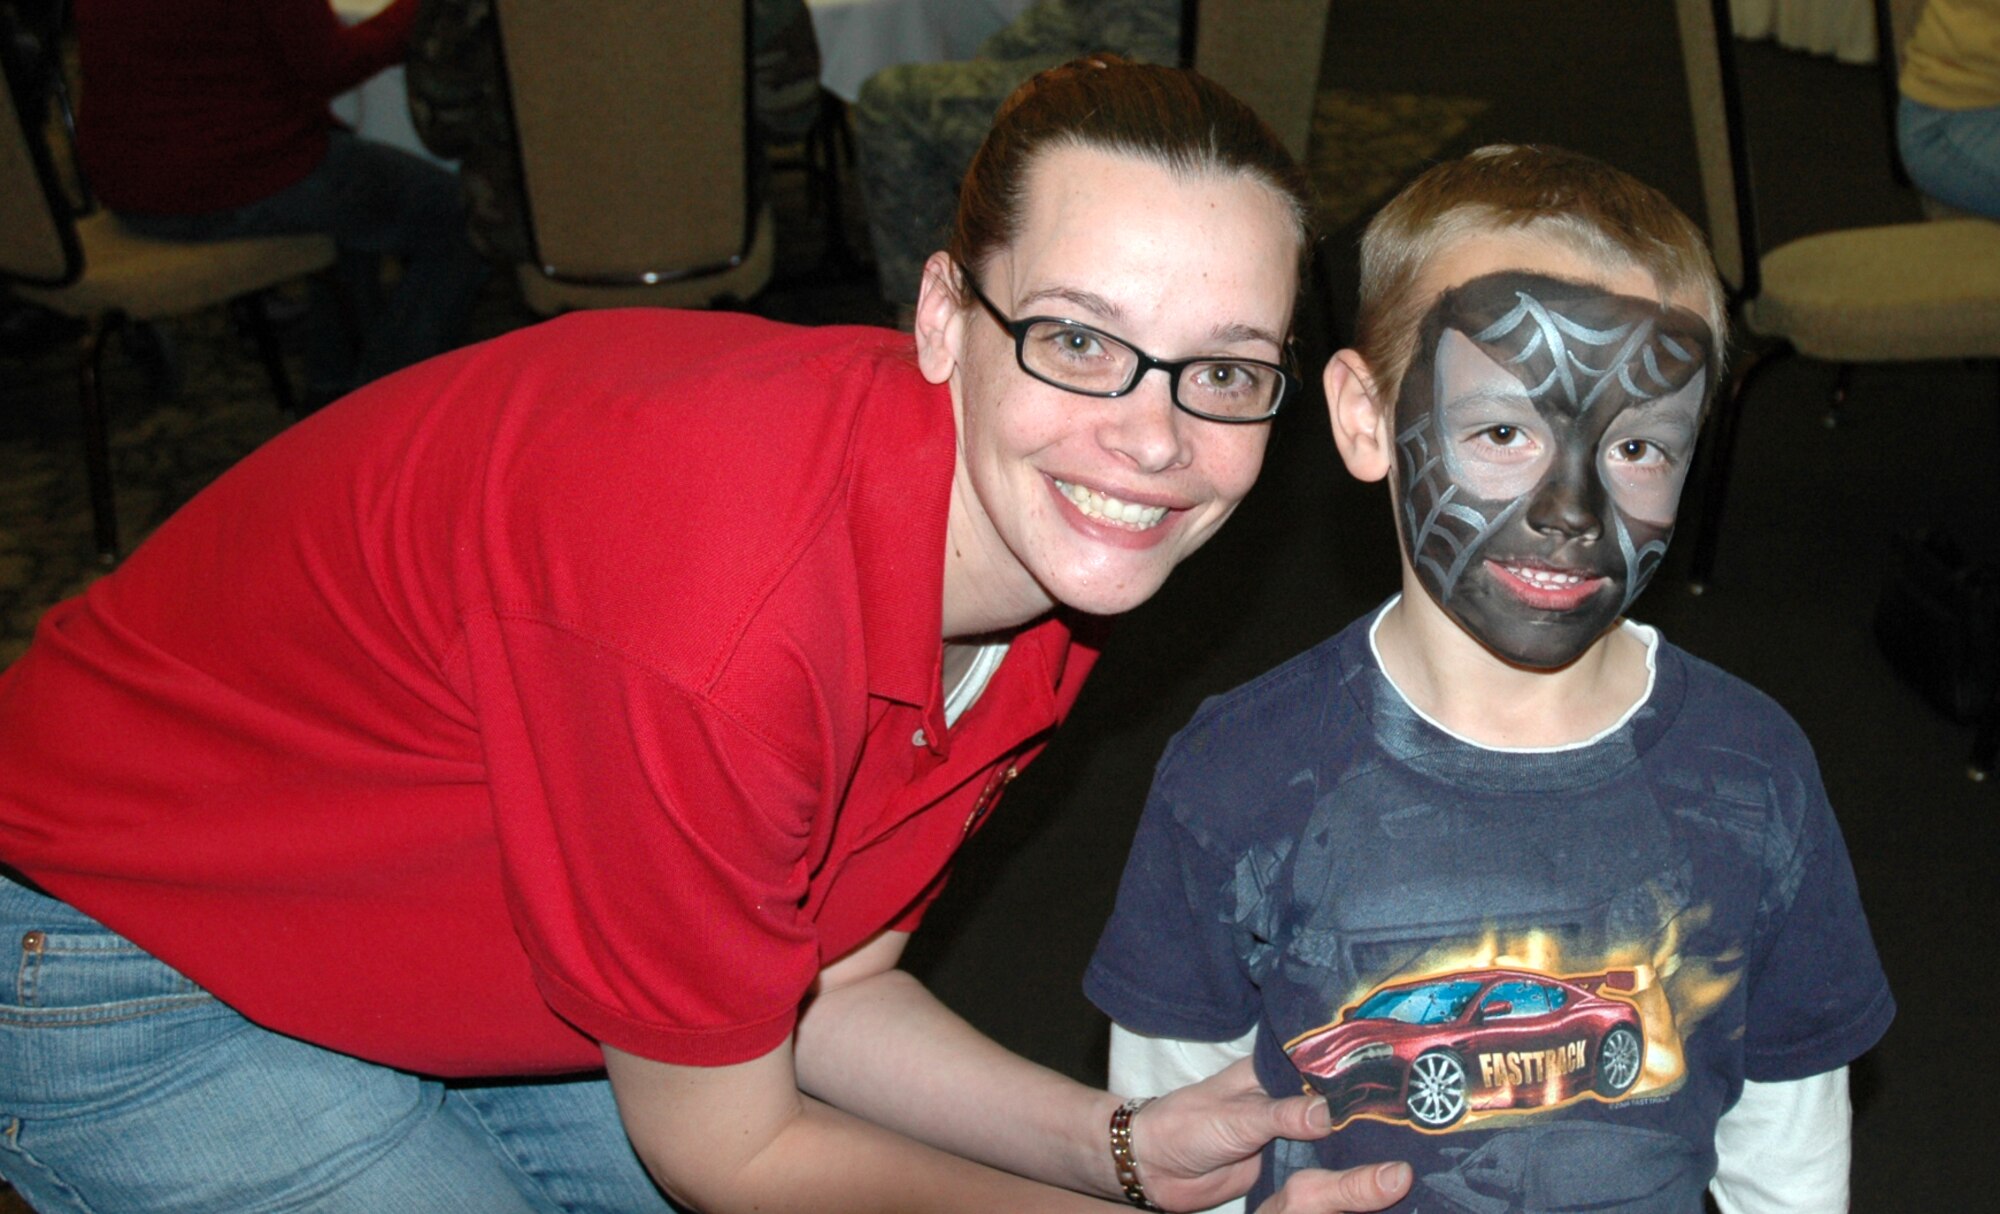 Tech. Sgt. Jennifer Lyon, Airman & Family Readiness Center, poses with her son, Payton, 5, who just got his face painted at the Welcome Home Carnival March 12 at Club Hill.